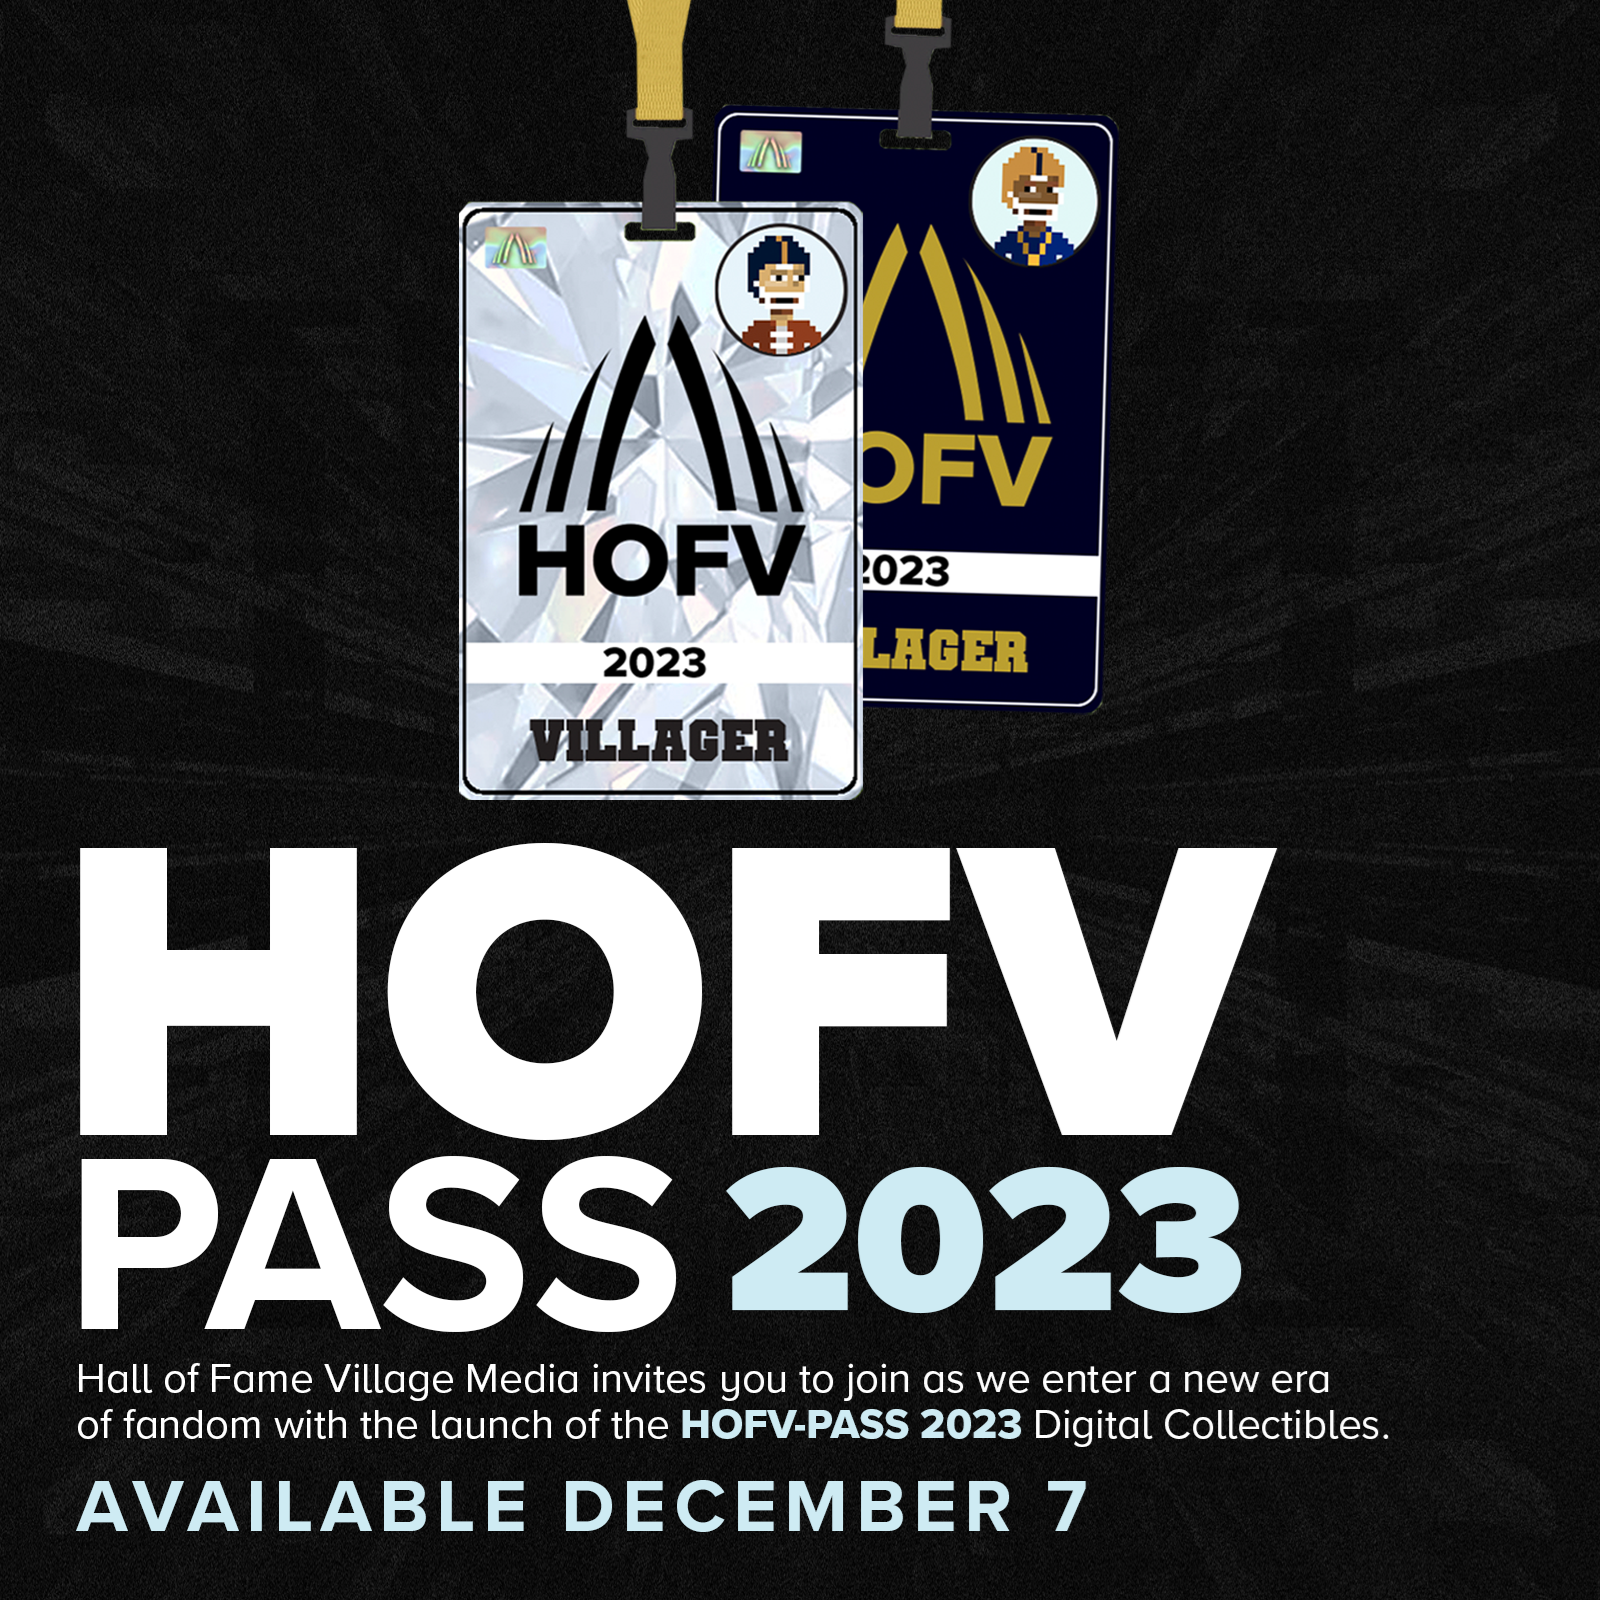 HOFV-Pass 2023 Offers VIPAccess to Hall of Fame Village Events and Media Experiences